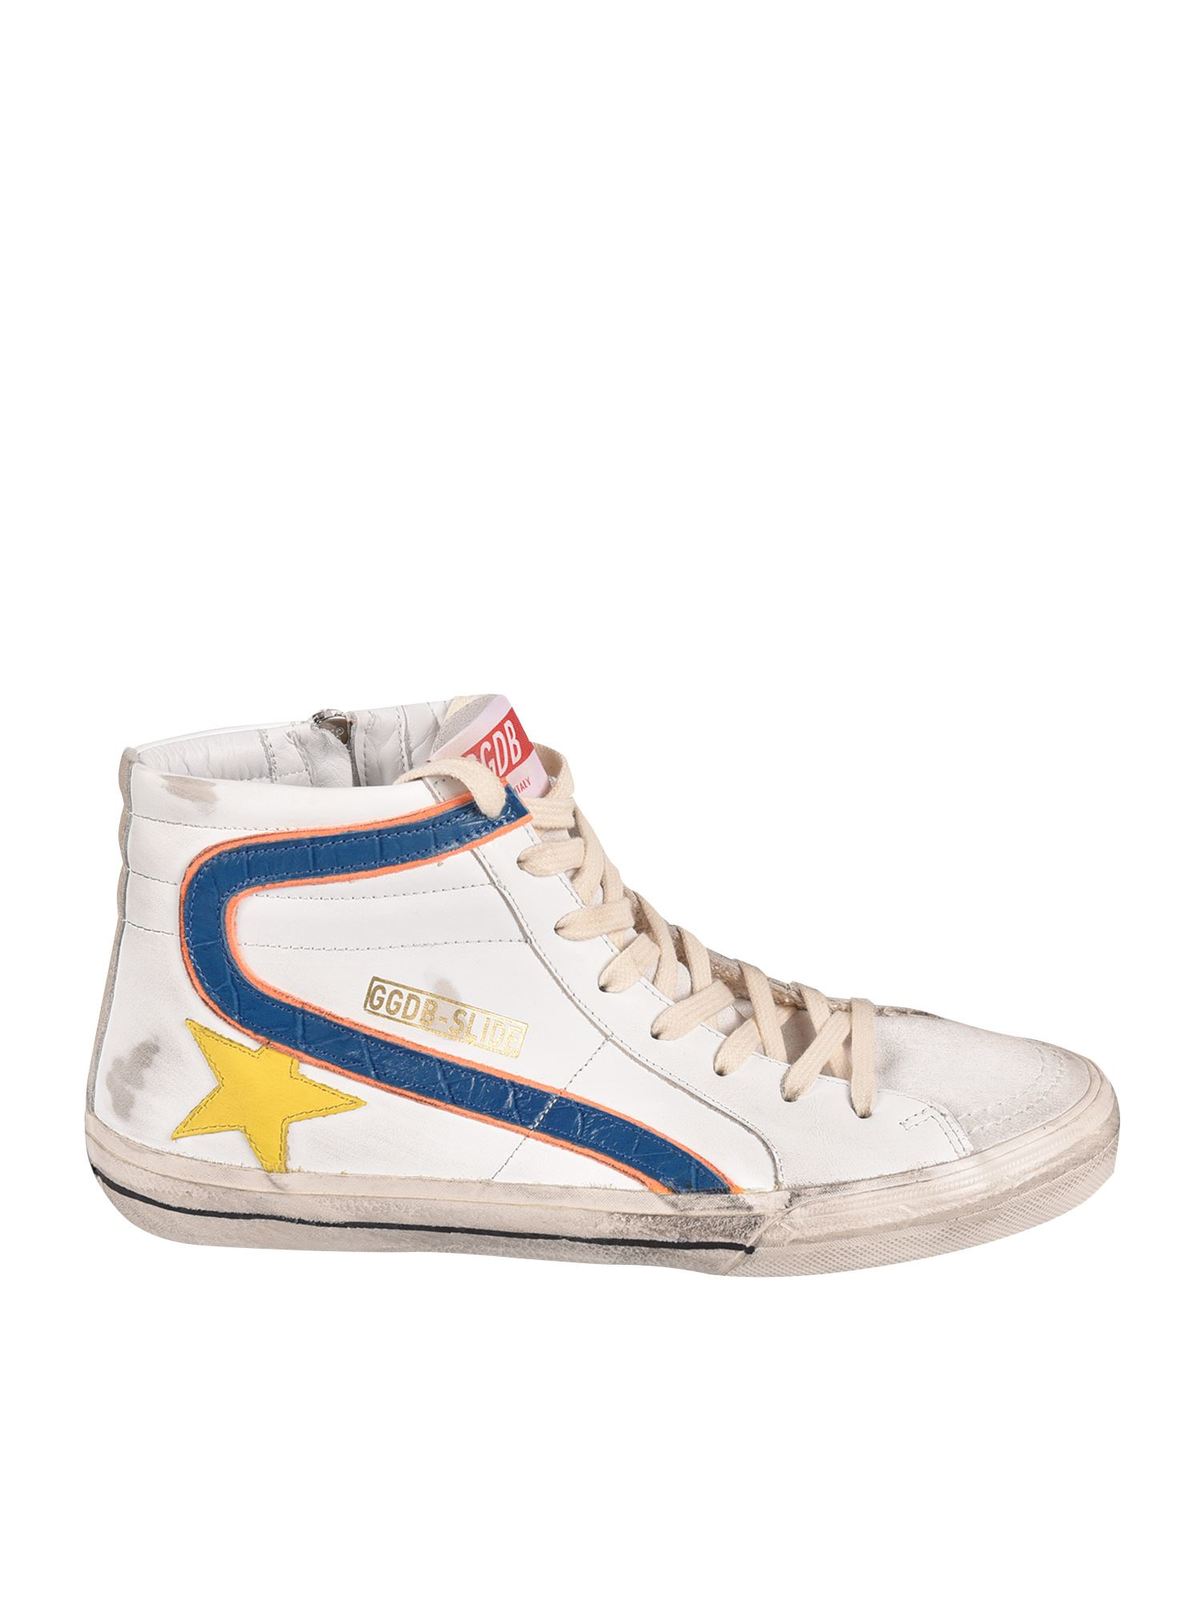 GOLDEN GOOSE SLIDE CLASSIC trainers IN WHITE AND BLUE